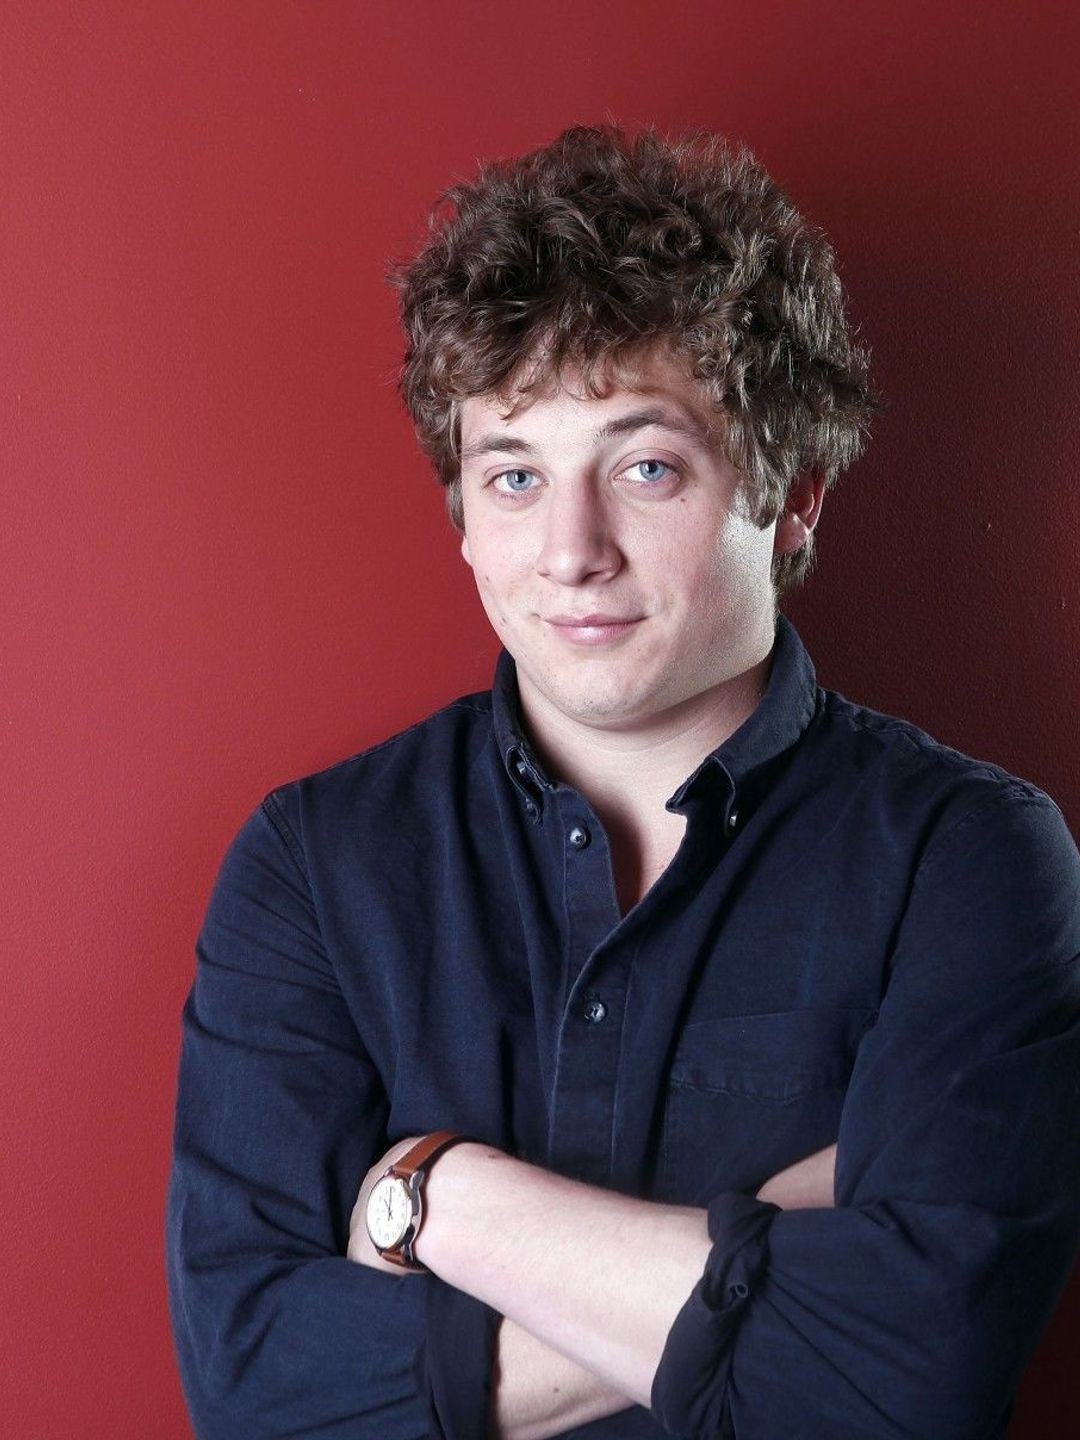 Jeremy Allen White young pics